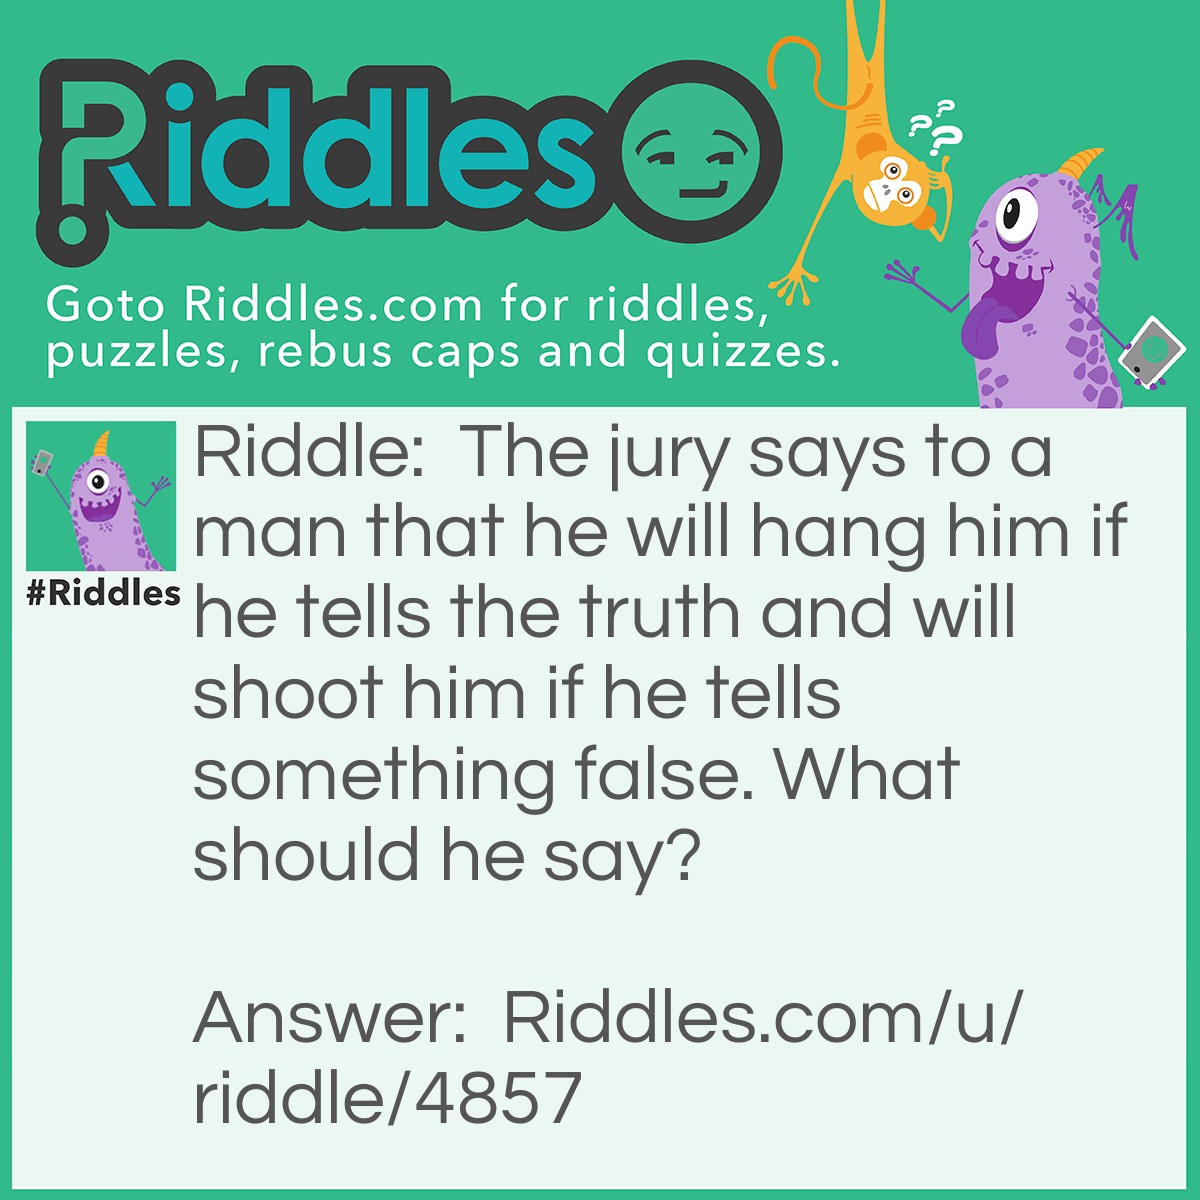 Riddle: The jury says to a man that he will hang him if he tells the truth and will shoot him if he tells something false. What should he say? Answer: Any type of an opinion. For example, he says that Saturn is the most beautiful planet in our solar system. They cannot hang him because some people will think its false, but they can't shoot because some people will think its true.